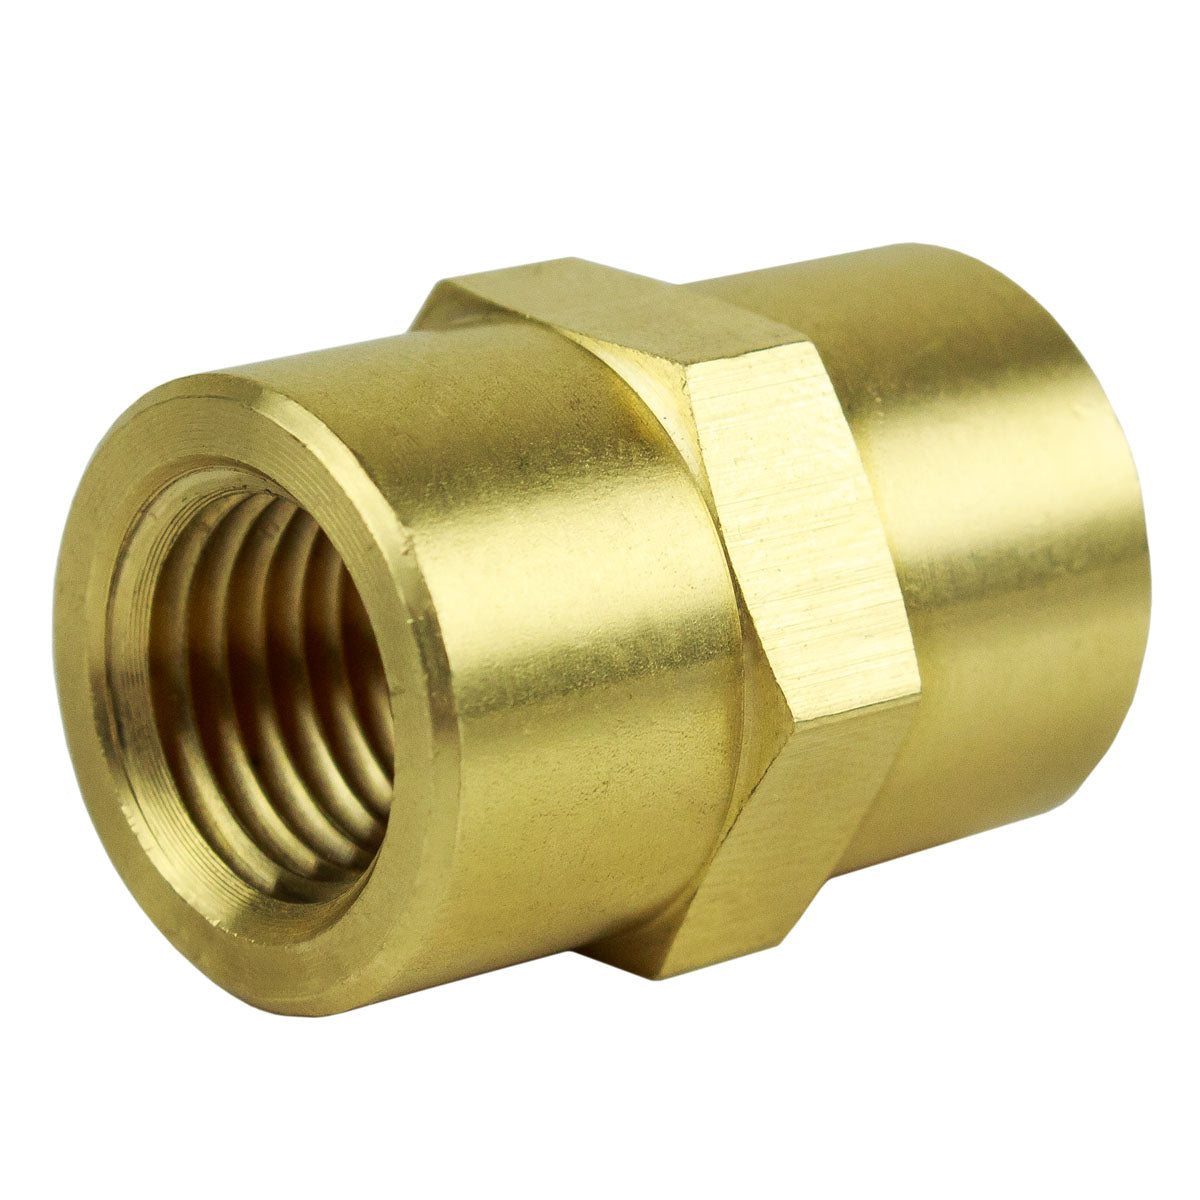 1/4" NPT Female Solid Brass Pipe Union Adapter Fitting WOG Solid Connector